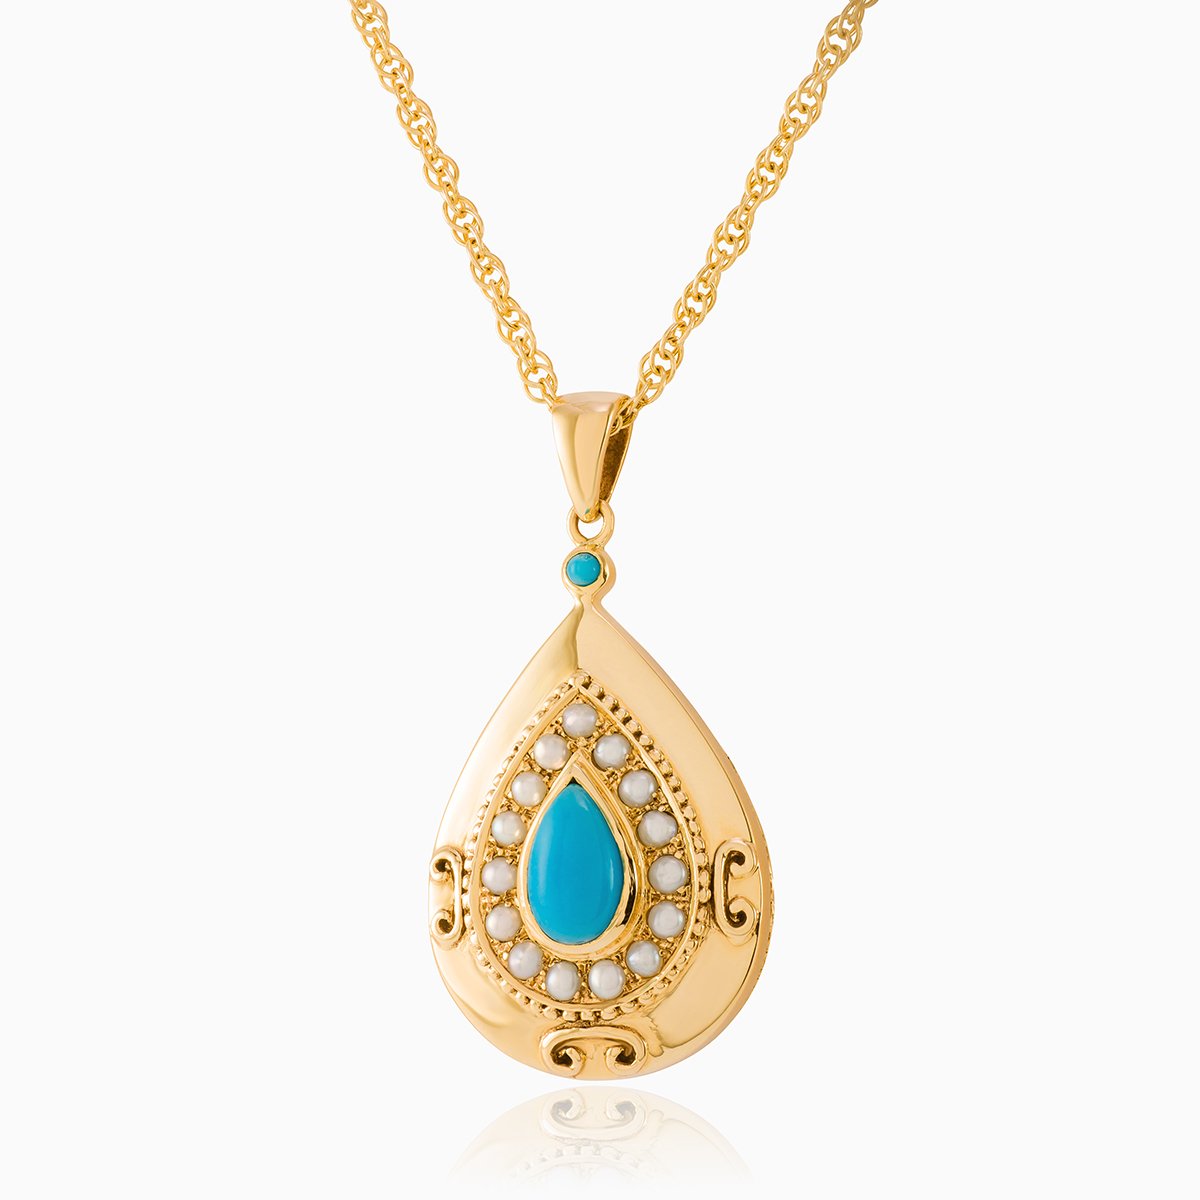 9 ct gold teardrop shaped locket set with a turquoise cabochon surrounded by seed pearls, on a 9 ct gold rope chain